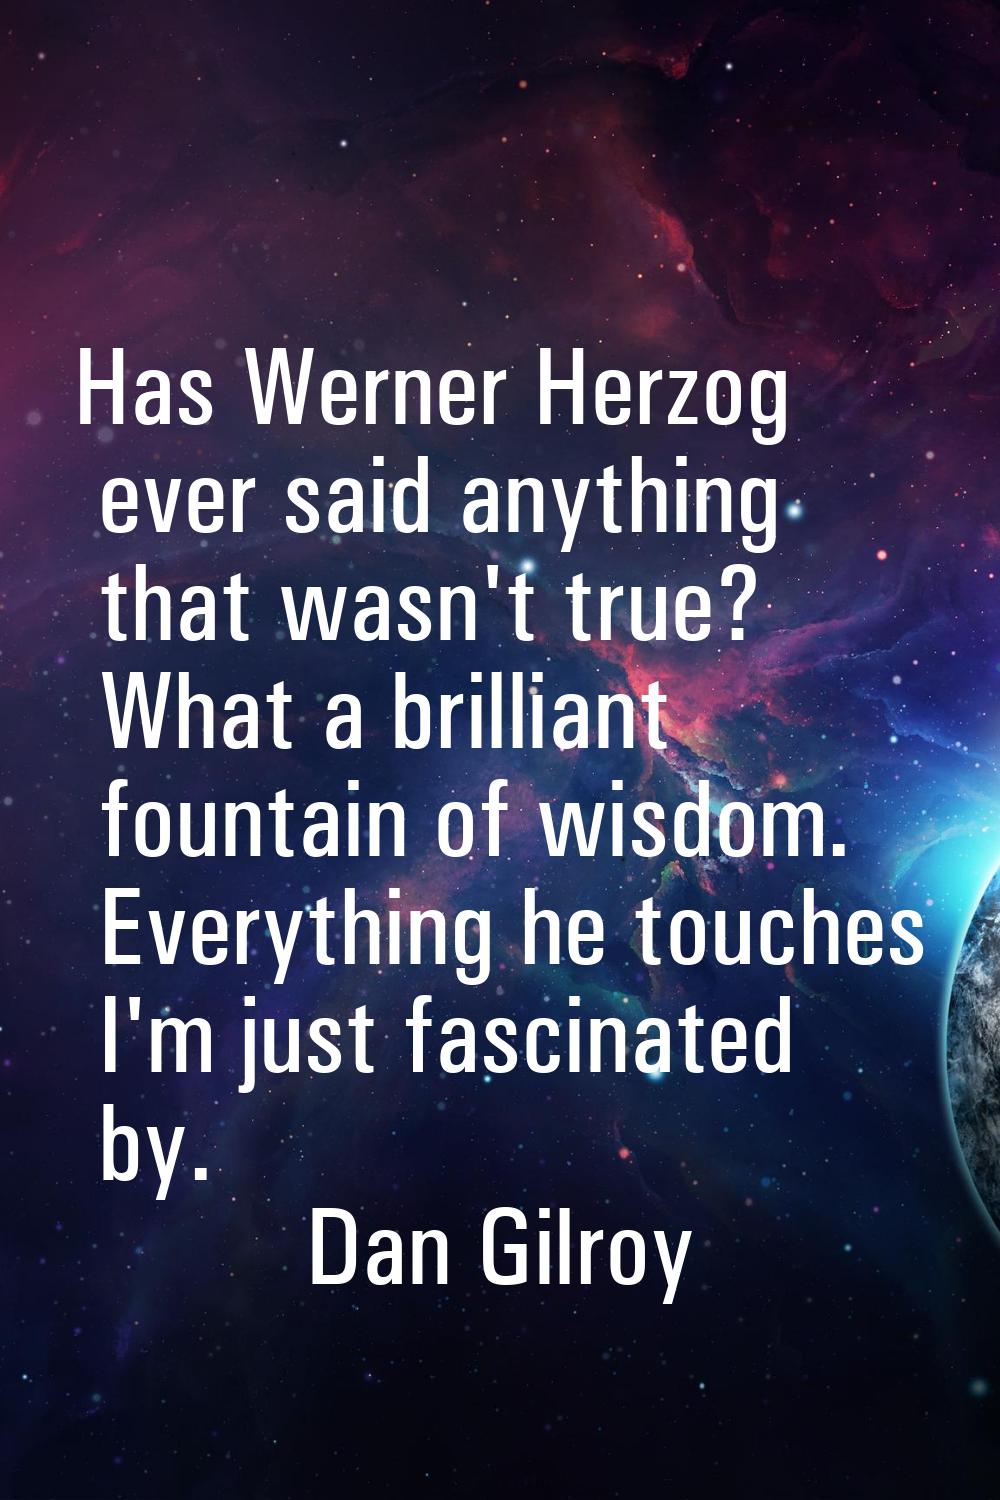 Has Werner Herzog ever said anything that wasn't true? What a brilliant fountain of wisdom. Everyth